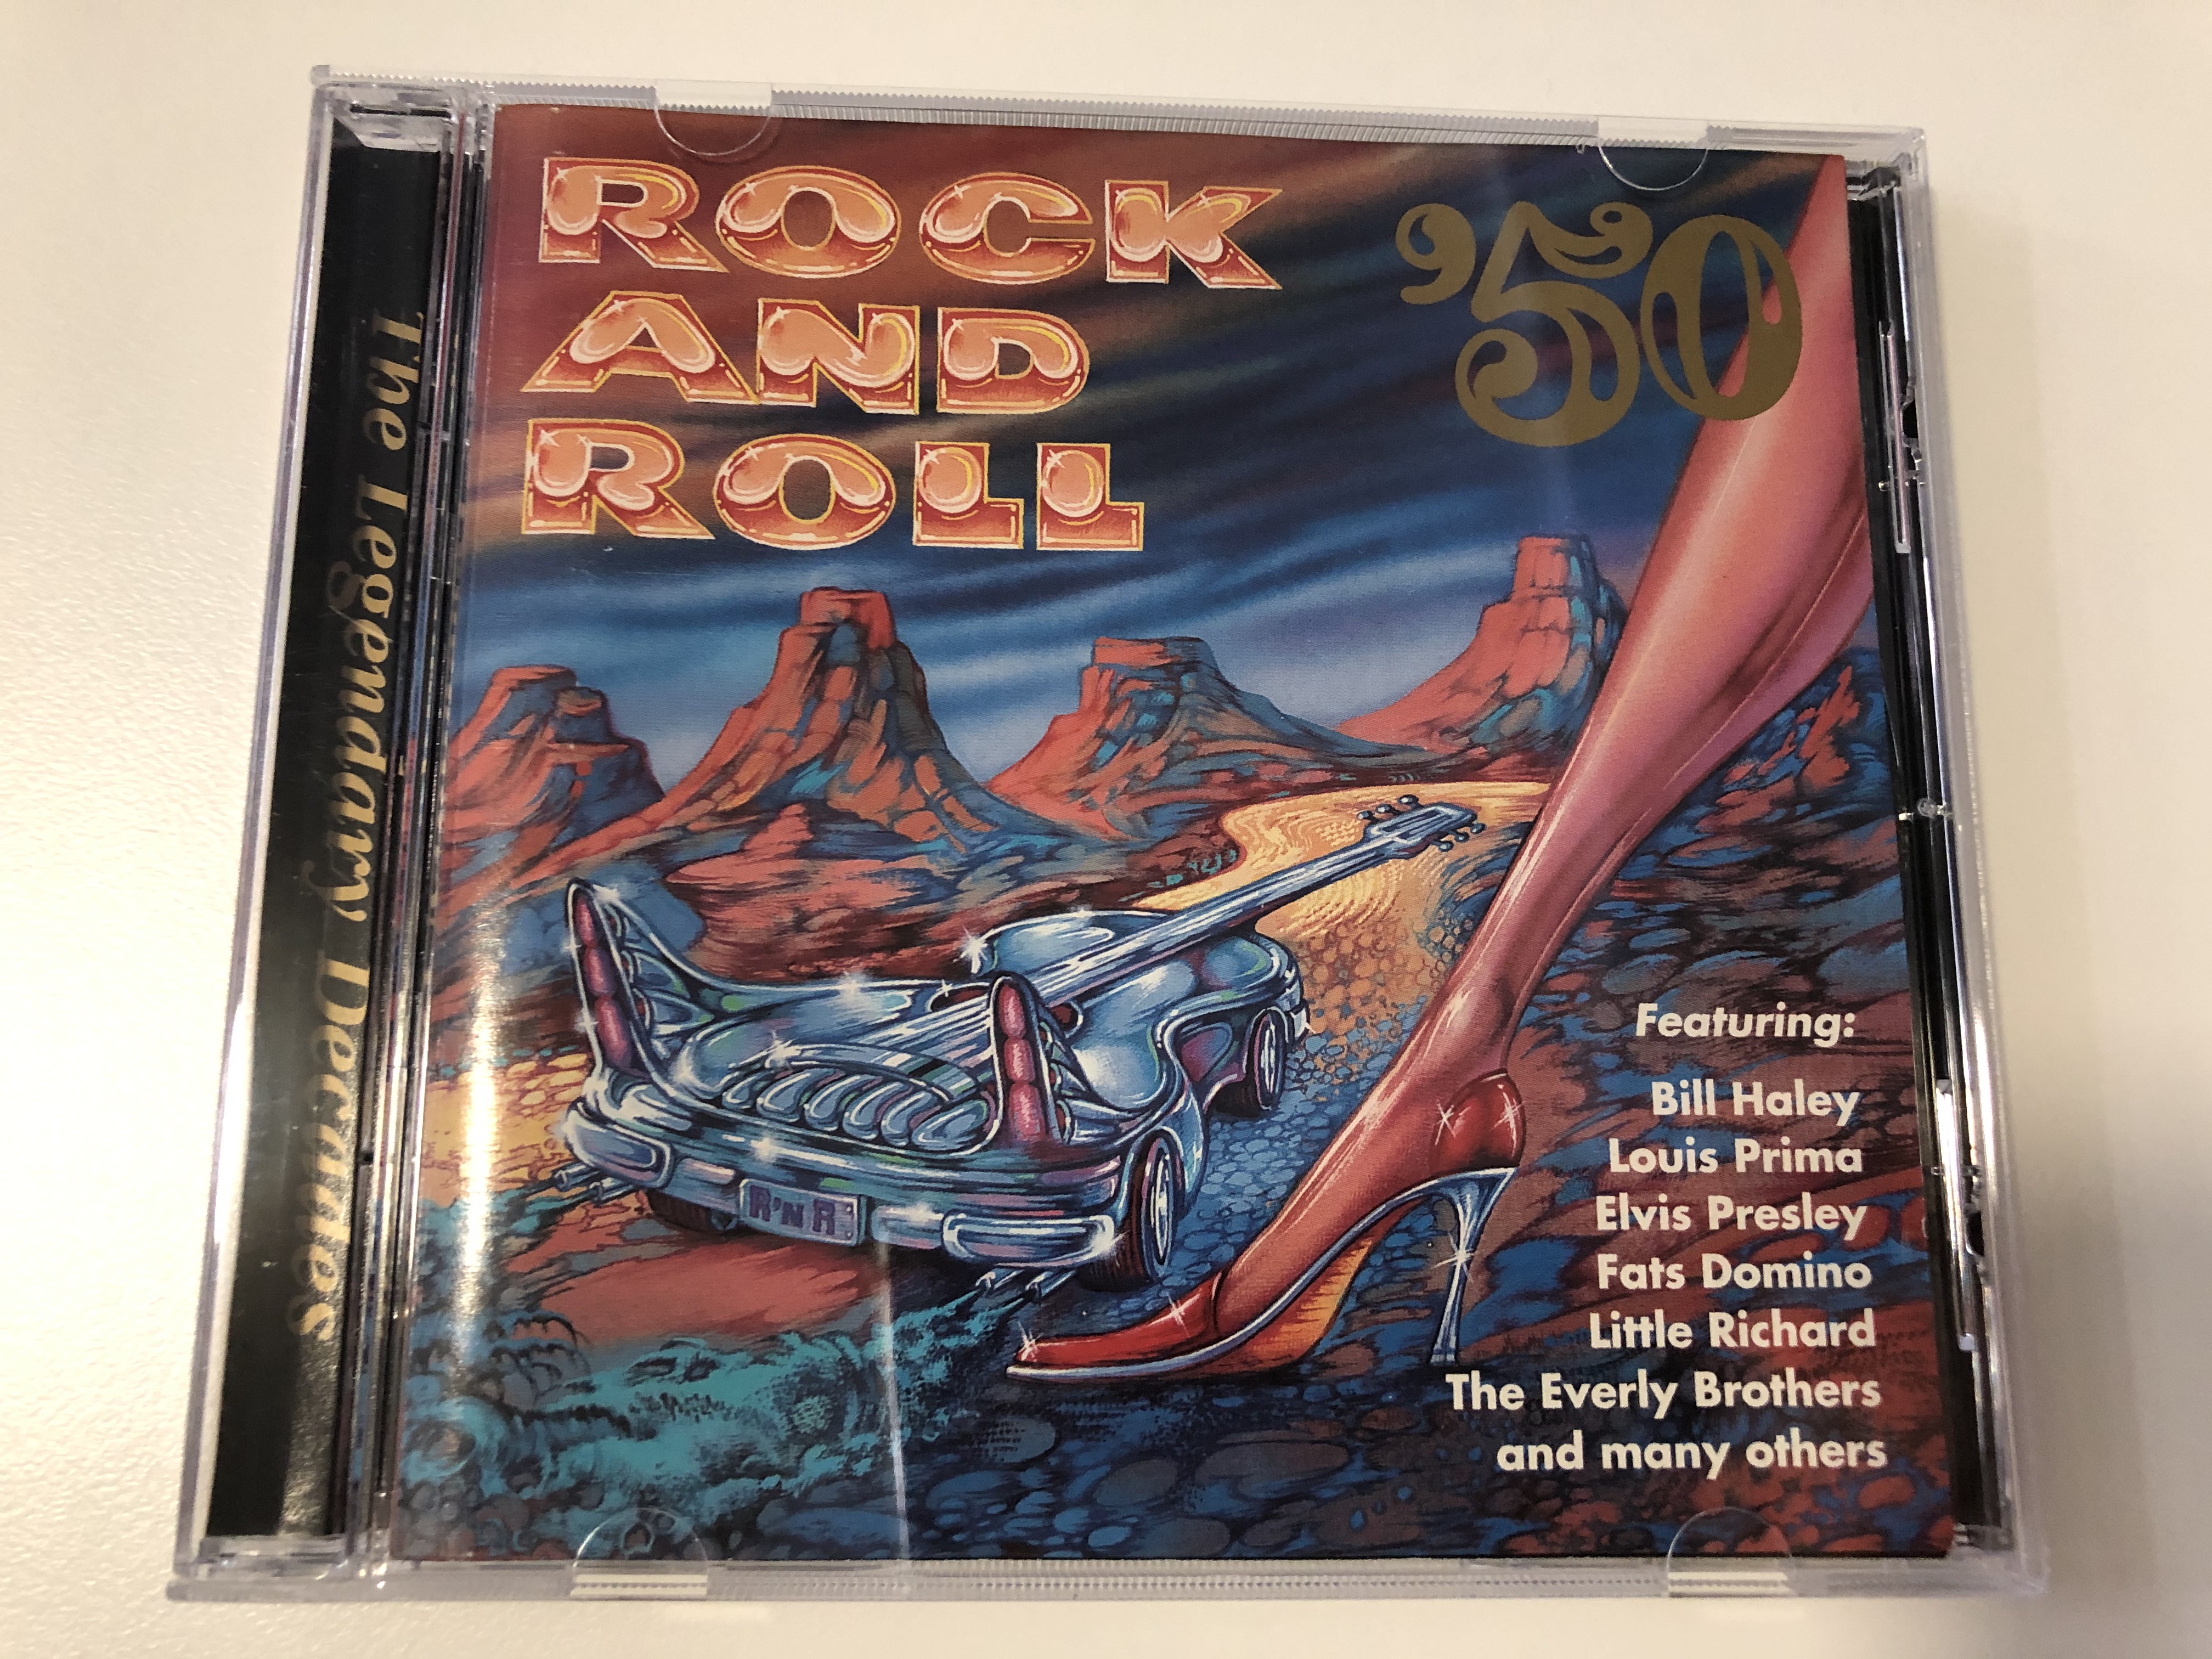 rock-and-roll-50-featuring-bill-haley-louis-prima-elvis-presley-fats-domino-little-richard-the-everly-brothers-and-many-others-audio-cd-1997-mcda-87001-1-.jpg